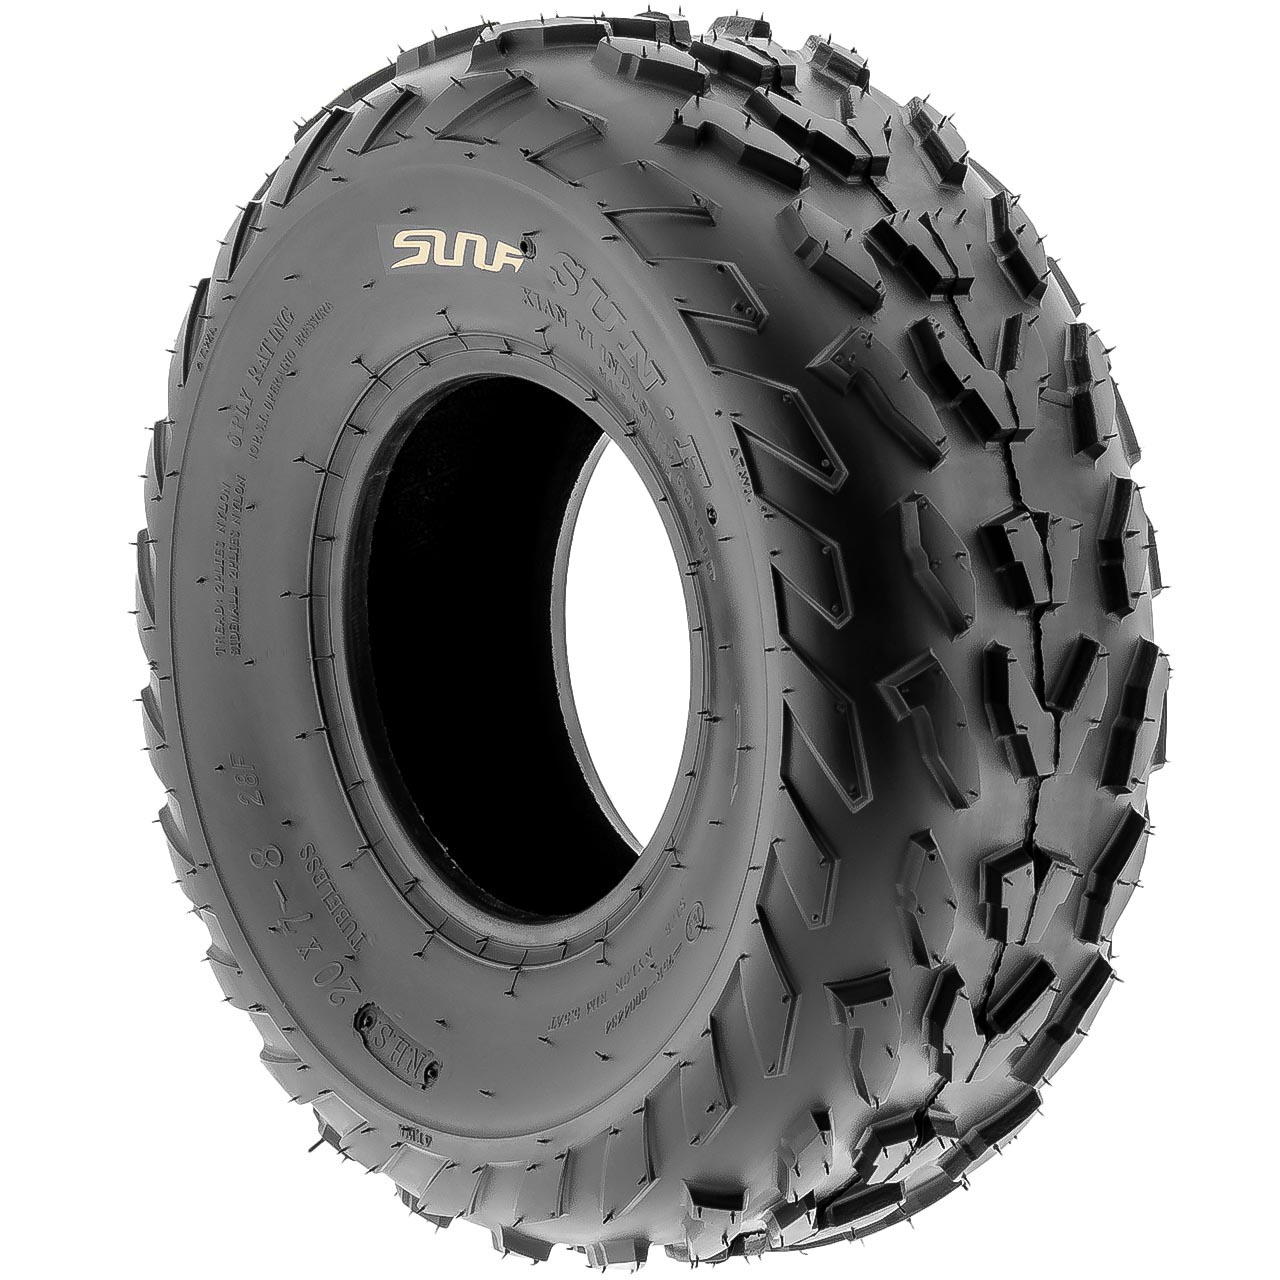 Pair of (2) 20x7-8 20x7x8 ATV All Terrain AT 6 Ply Tires A007 by SunF 8 Ply Vs 6 Ply Trailer Tires